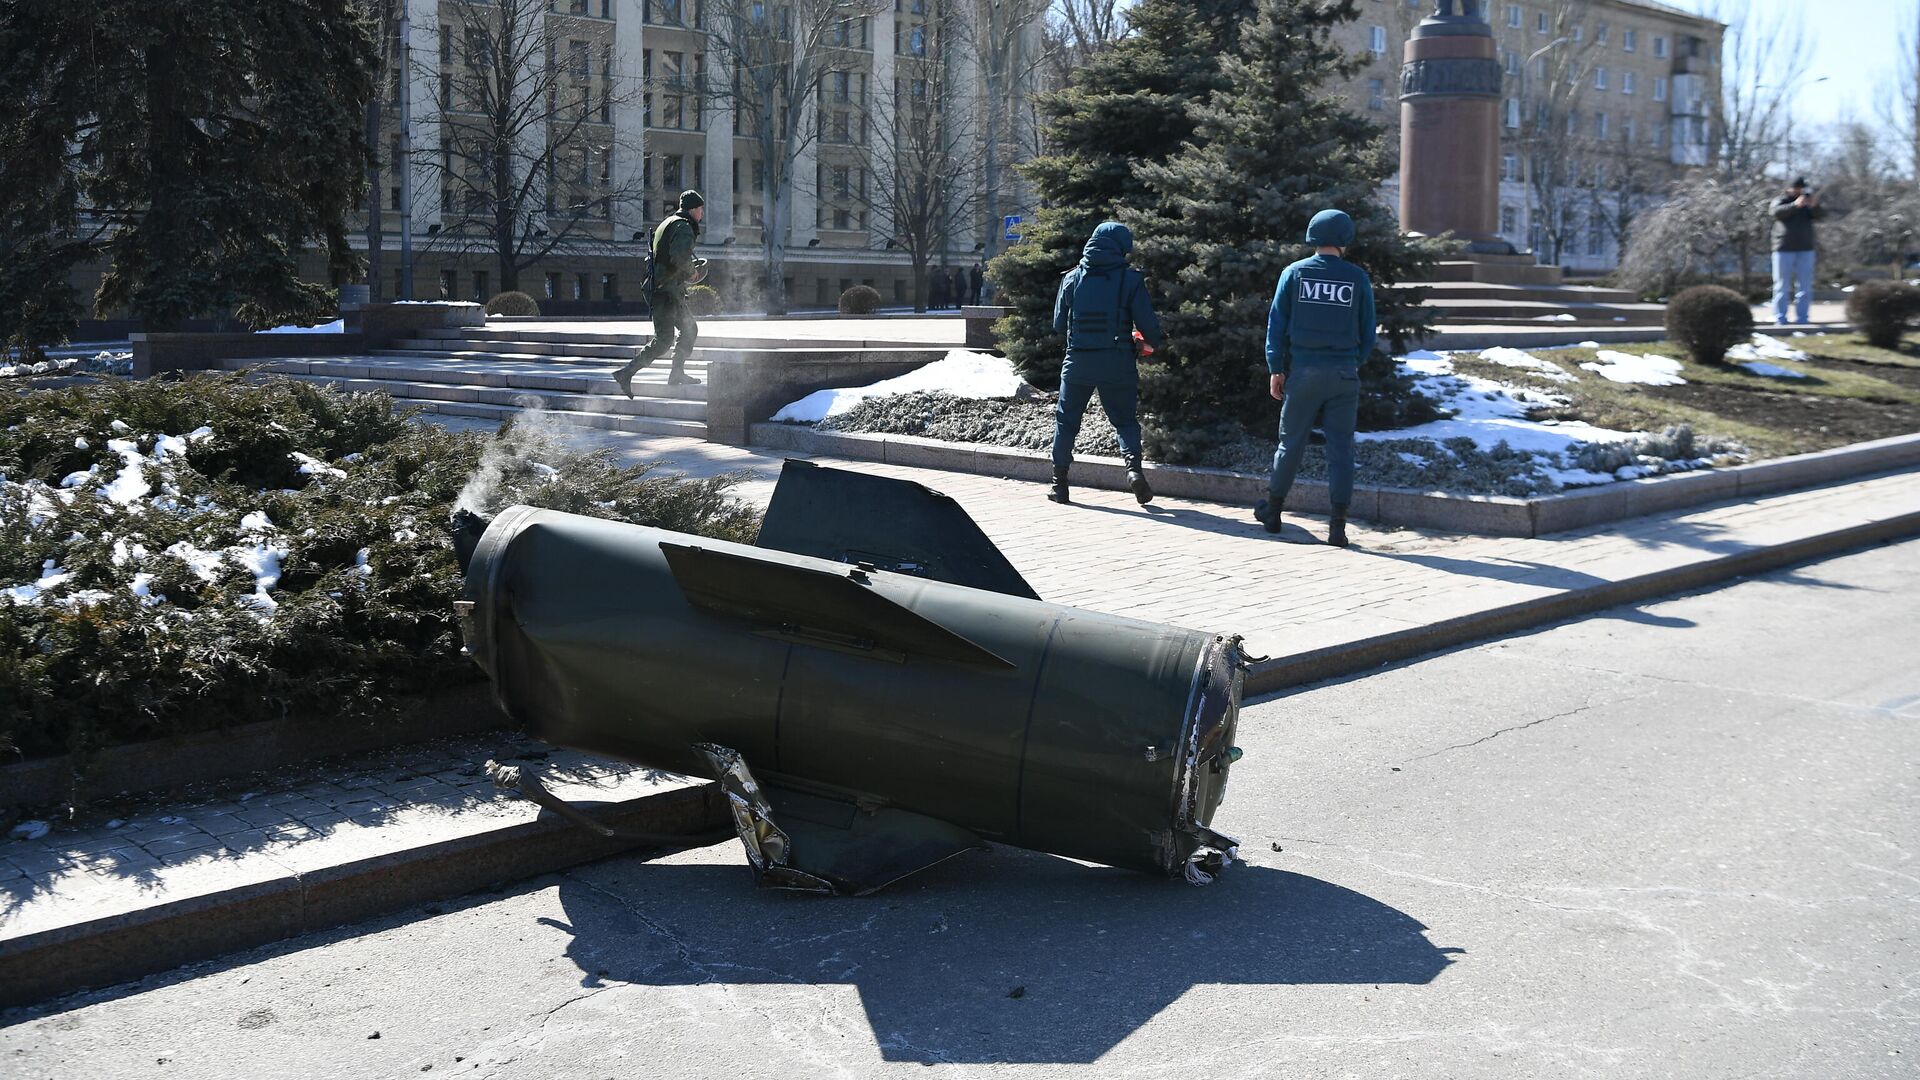 Emergency Situations Ministry officers walk near a fragment of a Ukrainian Tochka-U missile which had been shot down near the Government House in the city center during a recent shelling in Donetsk, Donetsk People's Republic. - Sputnik International, 1920, 14.03.2022